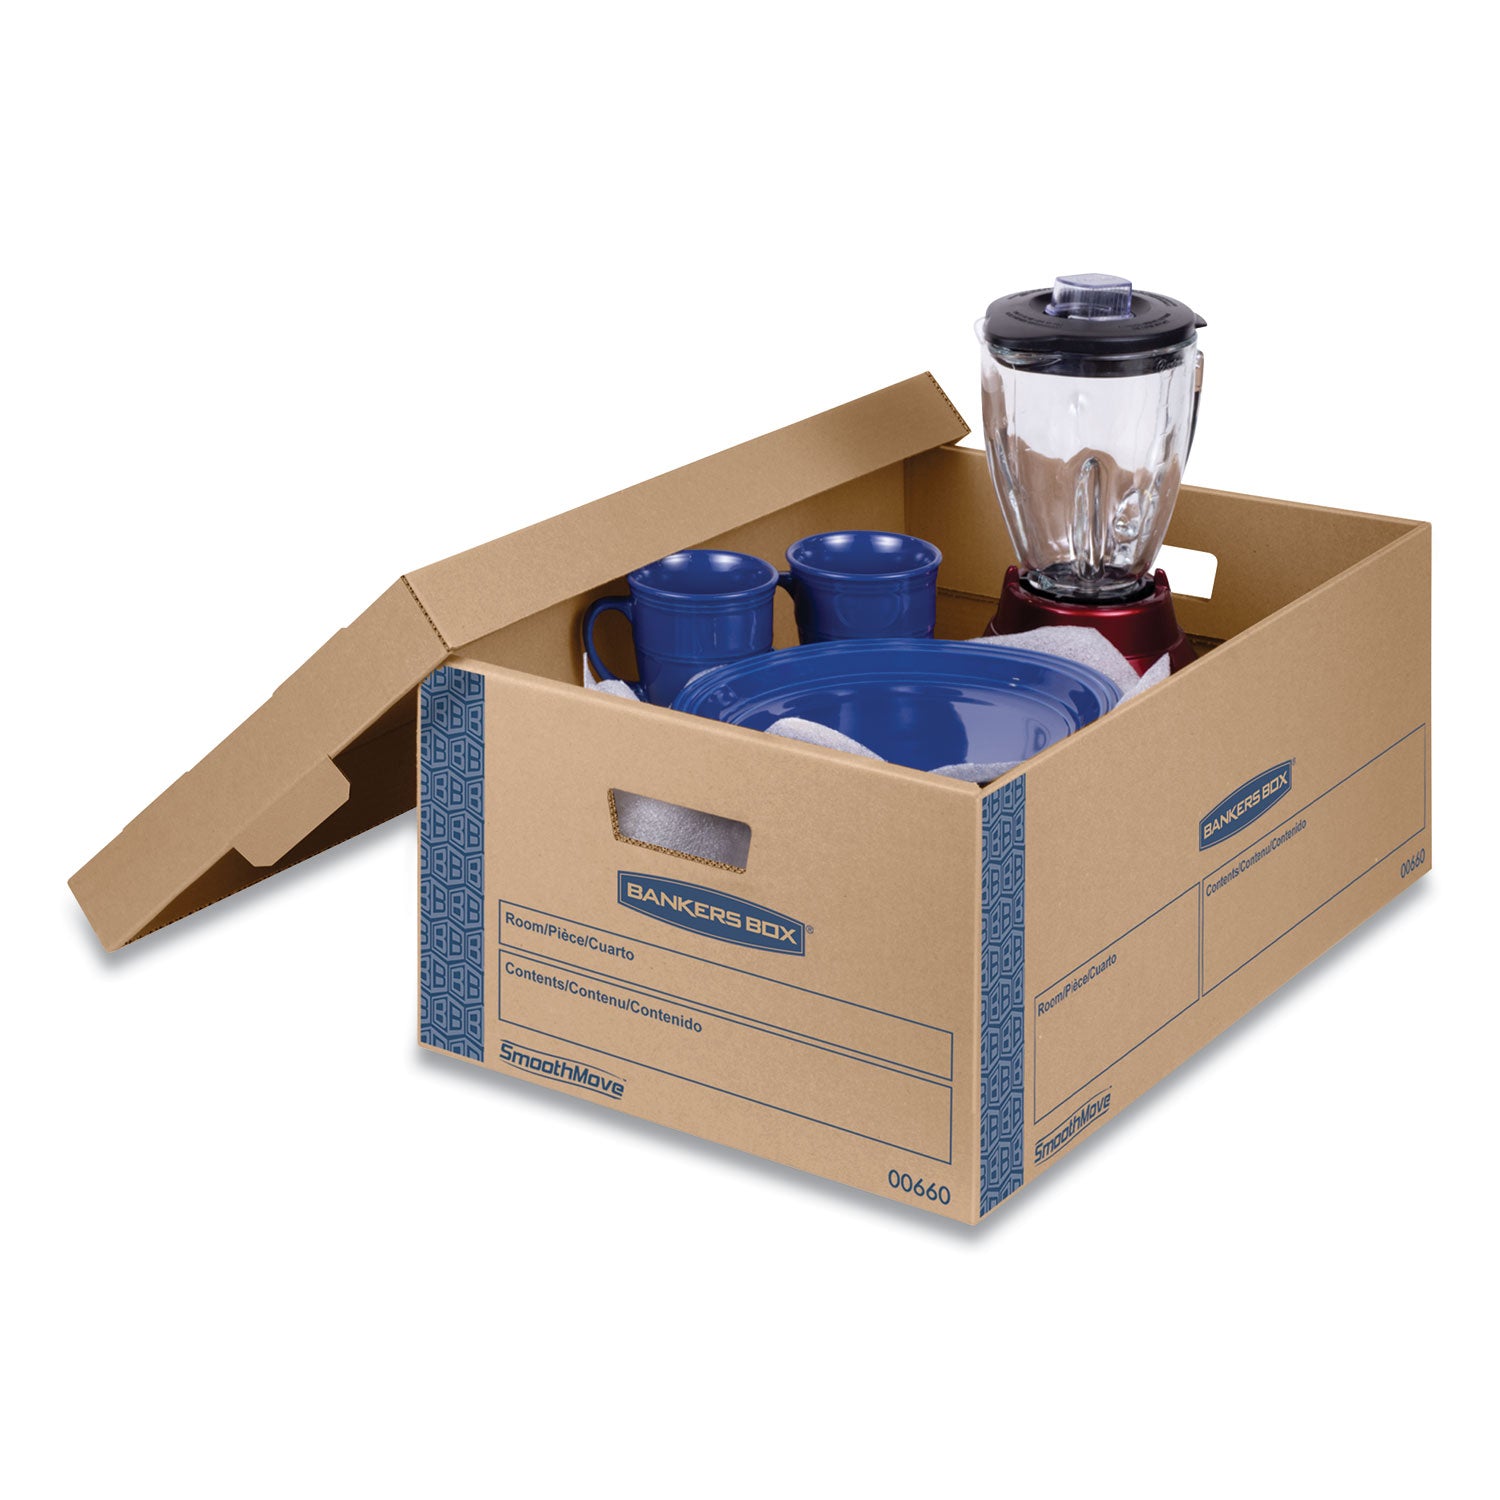 SmoothMove Prime Moving/Storage Boxes, Lift-Off Lid, Half Slotted Container, Large, 15" x 24" x 10", Brown/Blue, 8/Carton - 